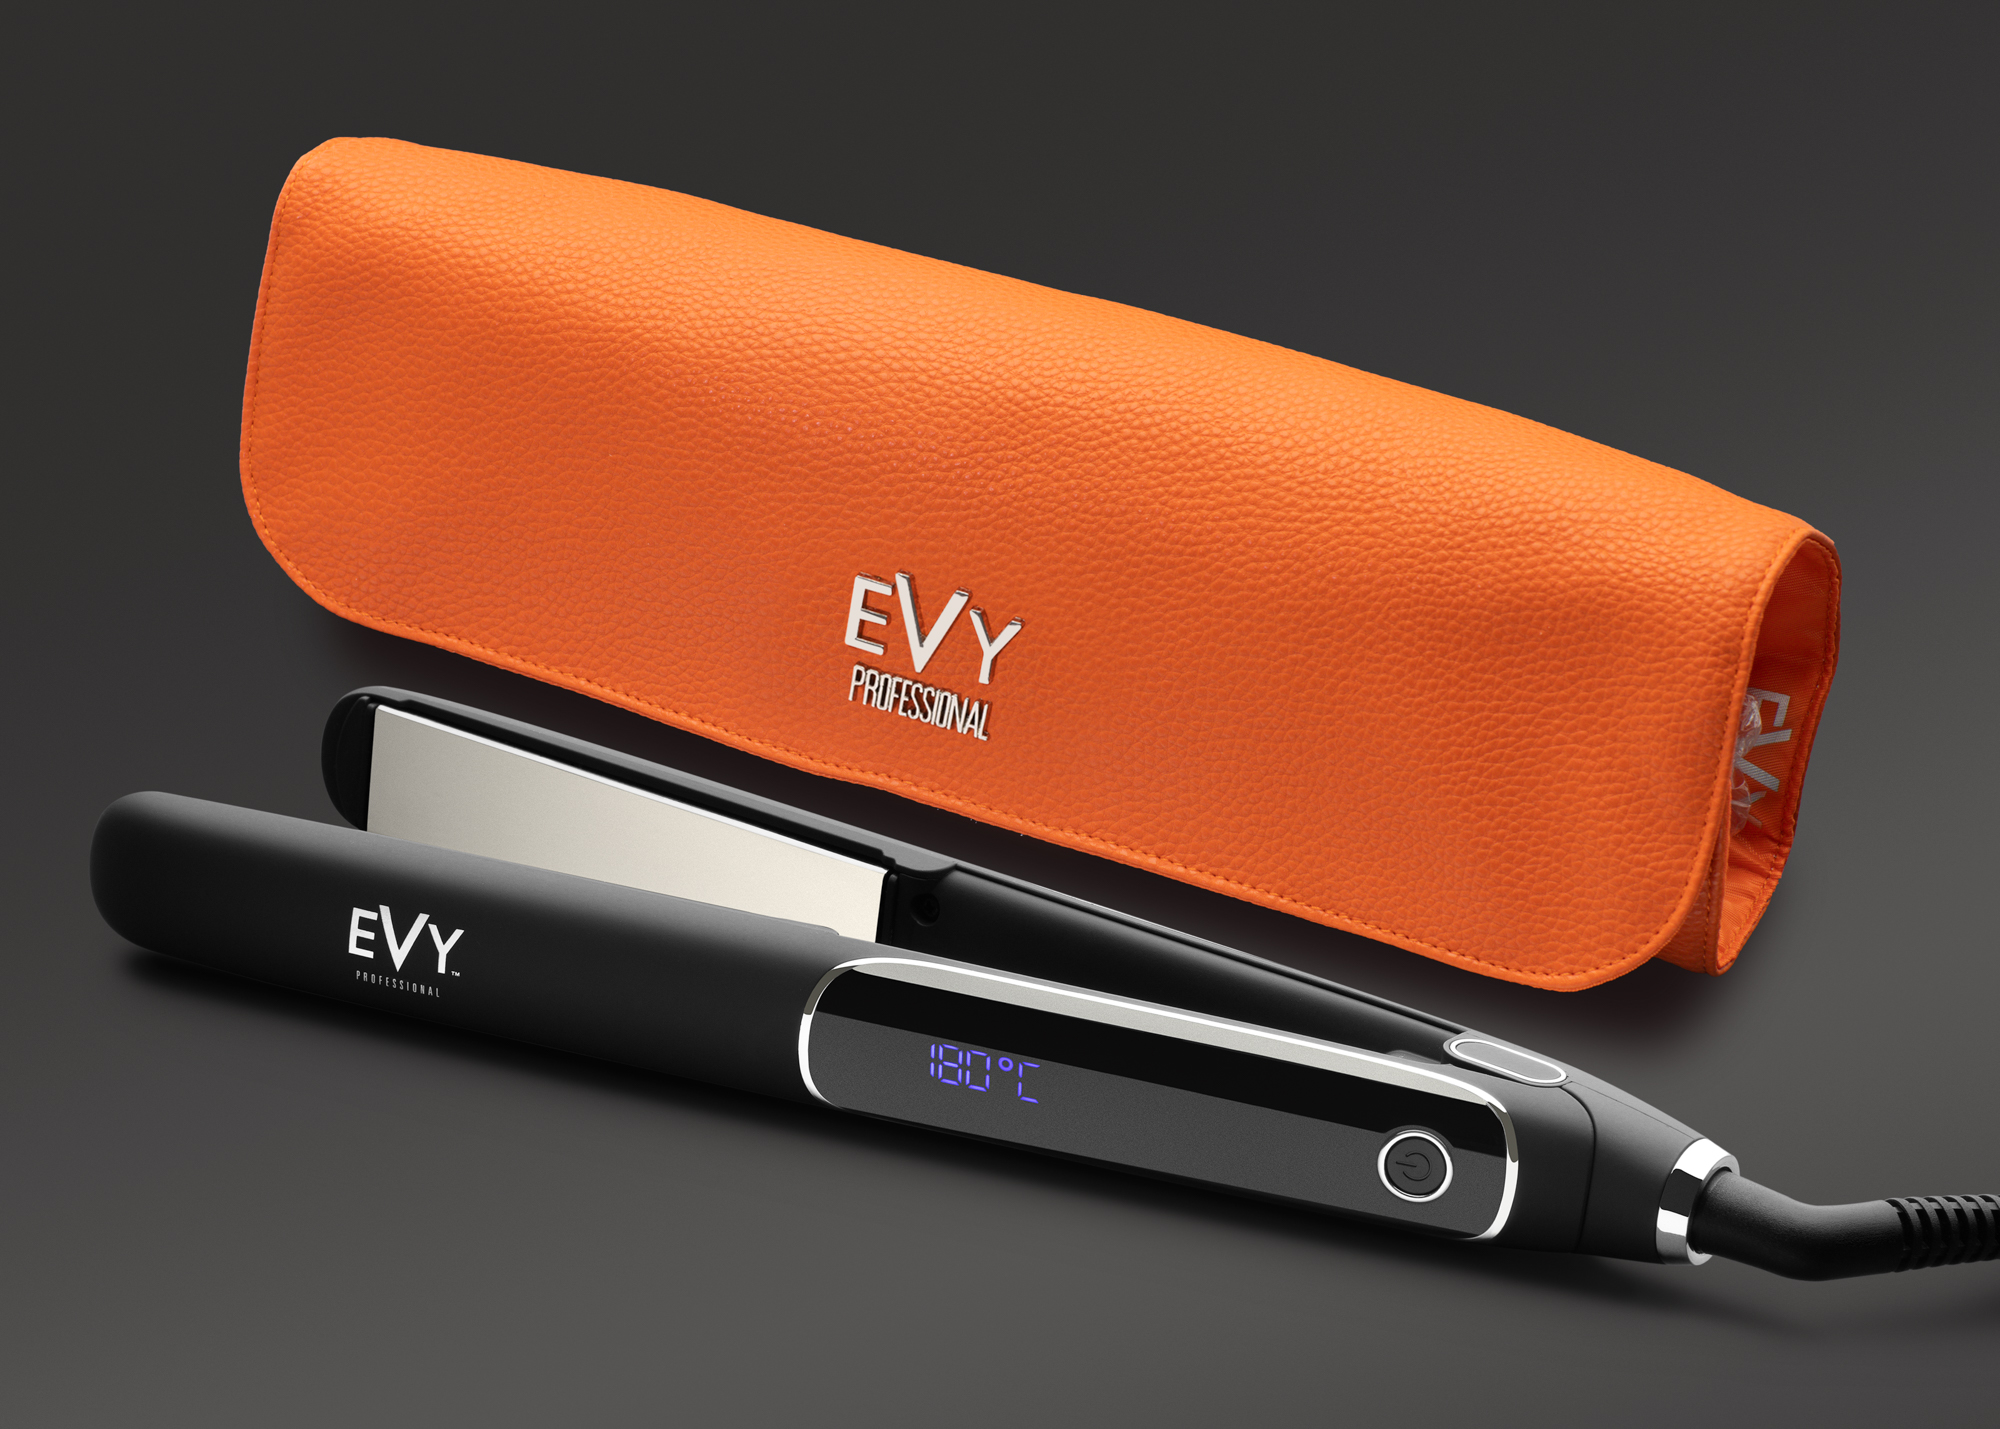 EVY PROFESSIONAL E-STYLER + LIMITED EDITION ZEST THERMAL MAT